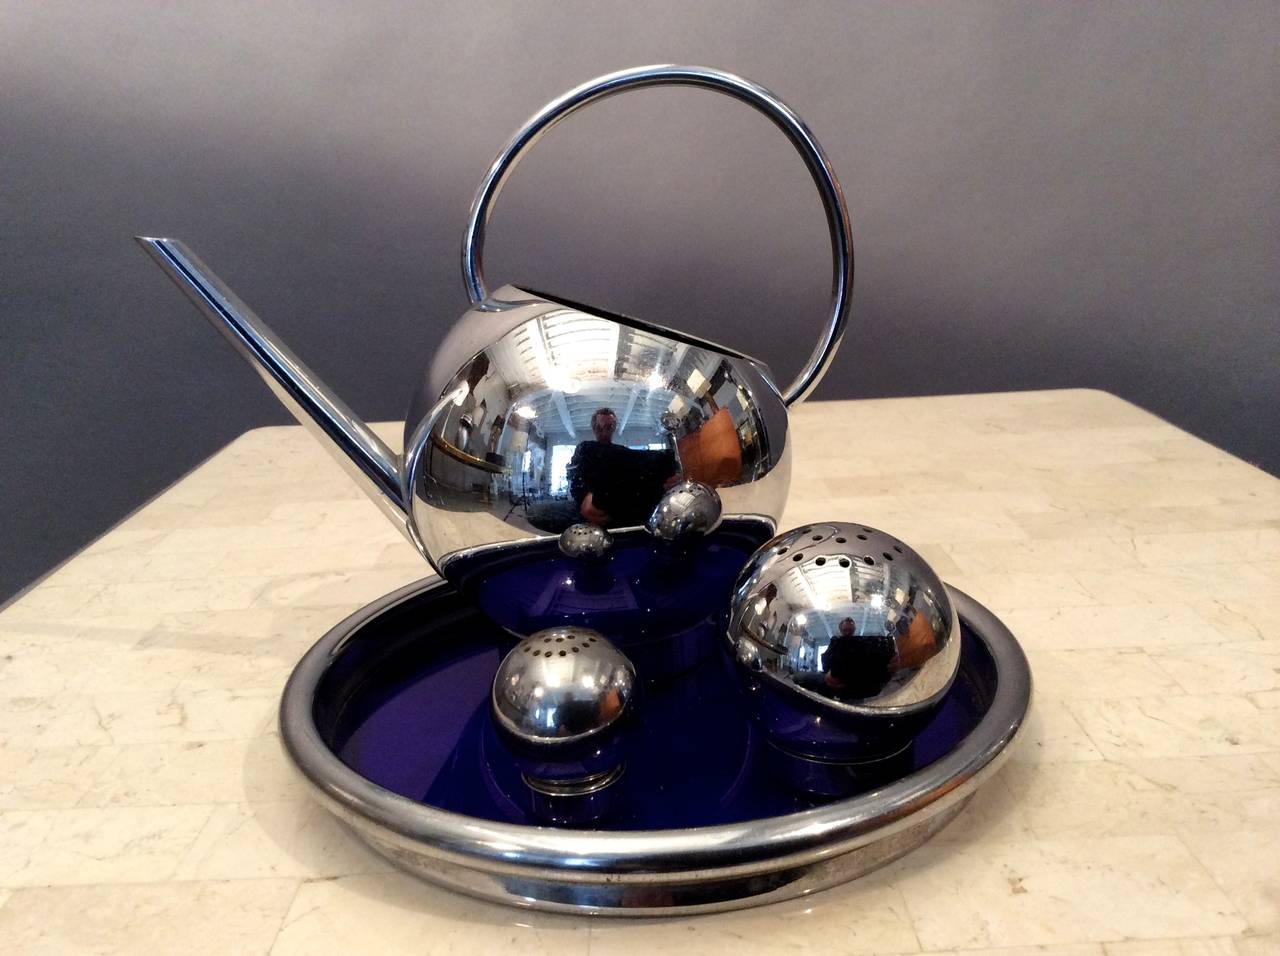 One of Russel Wright's earliest commissions in the mid-1930s was from the Chase Brass & Copper Company for this corn set also now used as a pancake set consisting of pitcher, tray with blue glass insert, and salt and pepper shakers made of